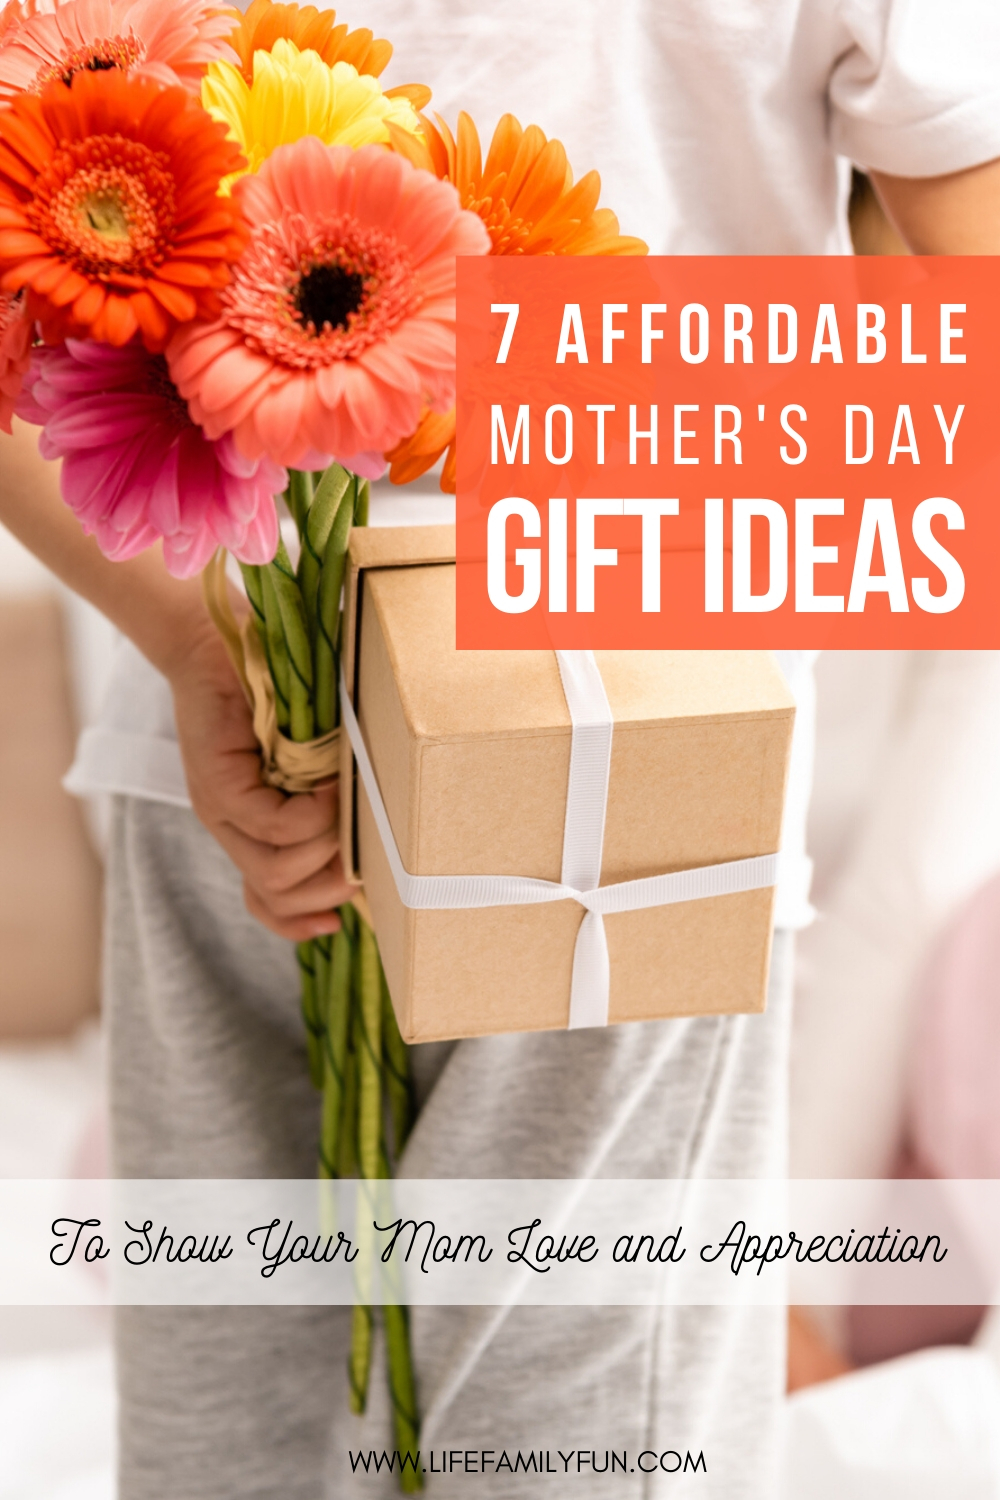 7-affordable-mother-s-day-gift-ideas-to-show-your-mom-gratitude